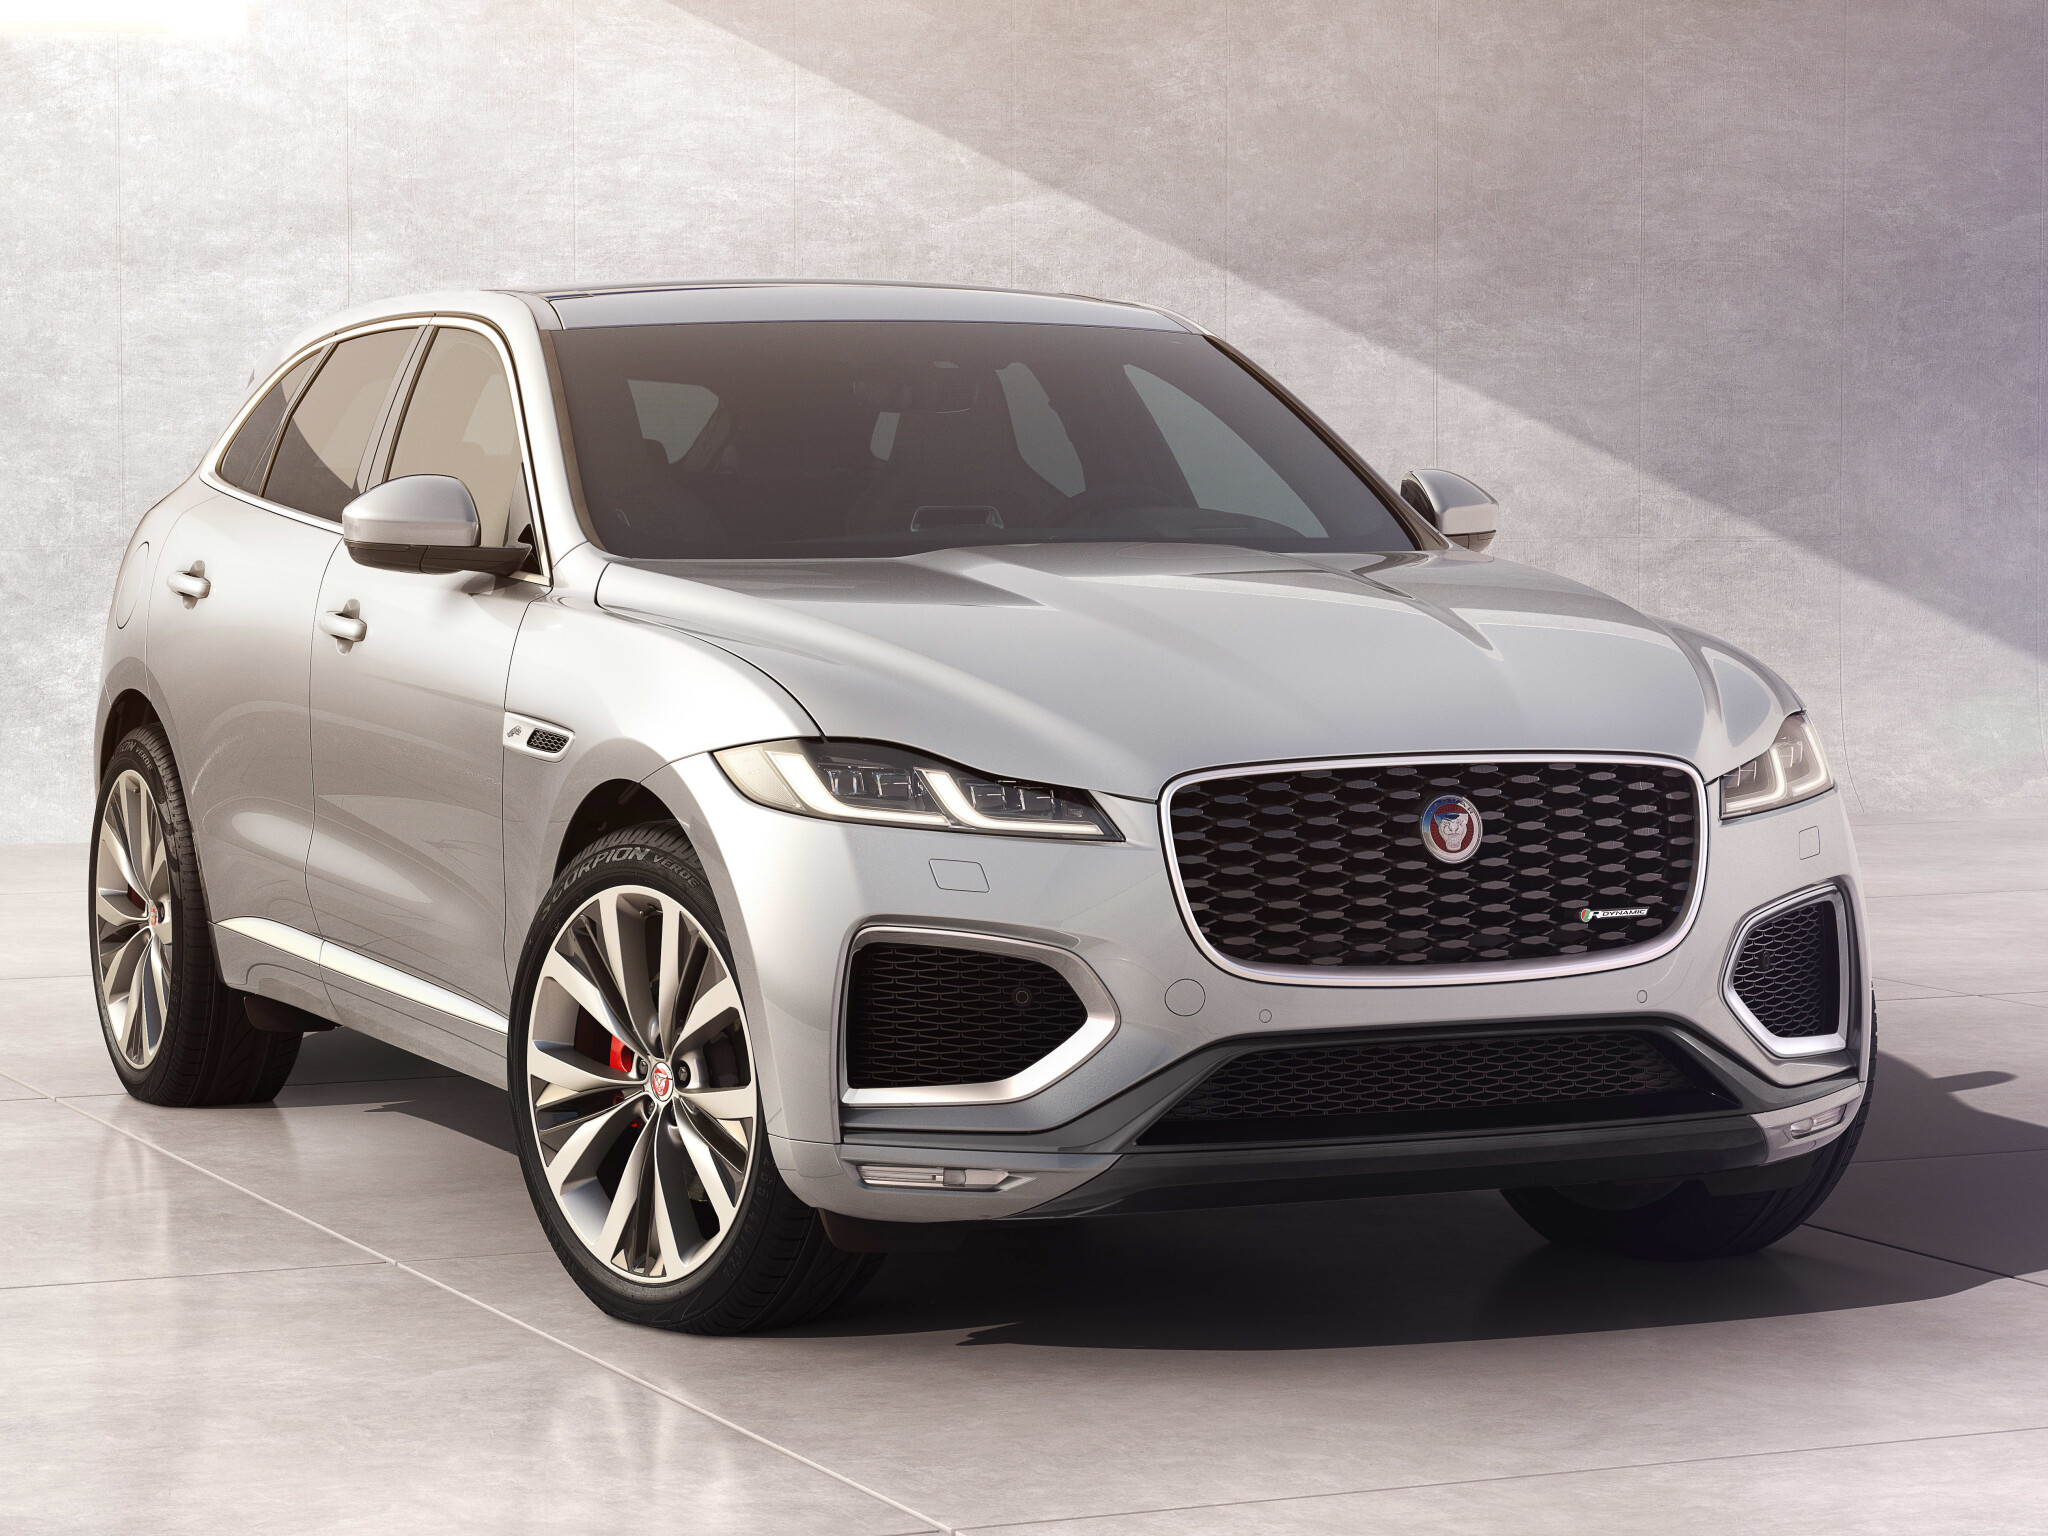 2022 Jaguar F-Pace updated pricing and features revealed for Australia